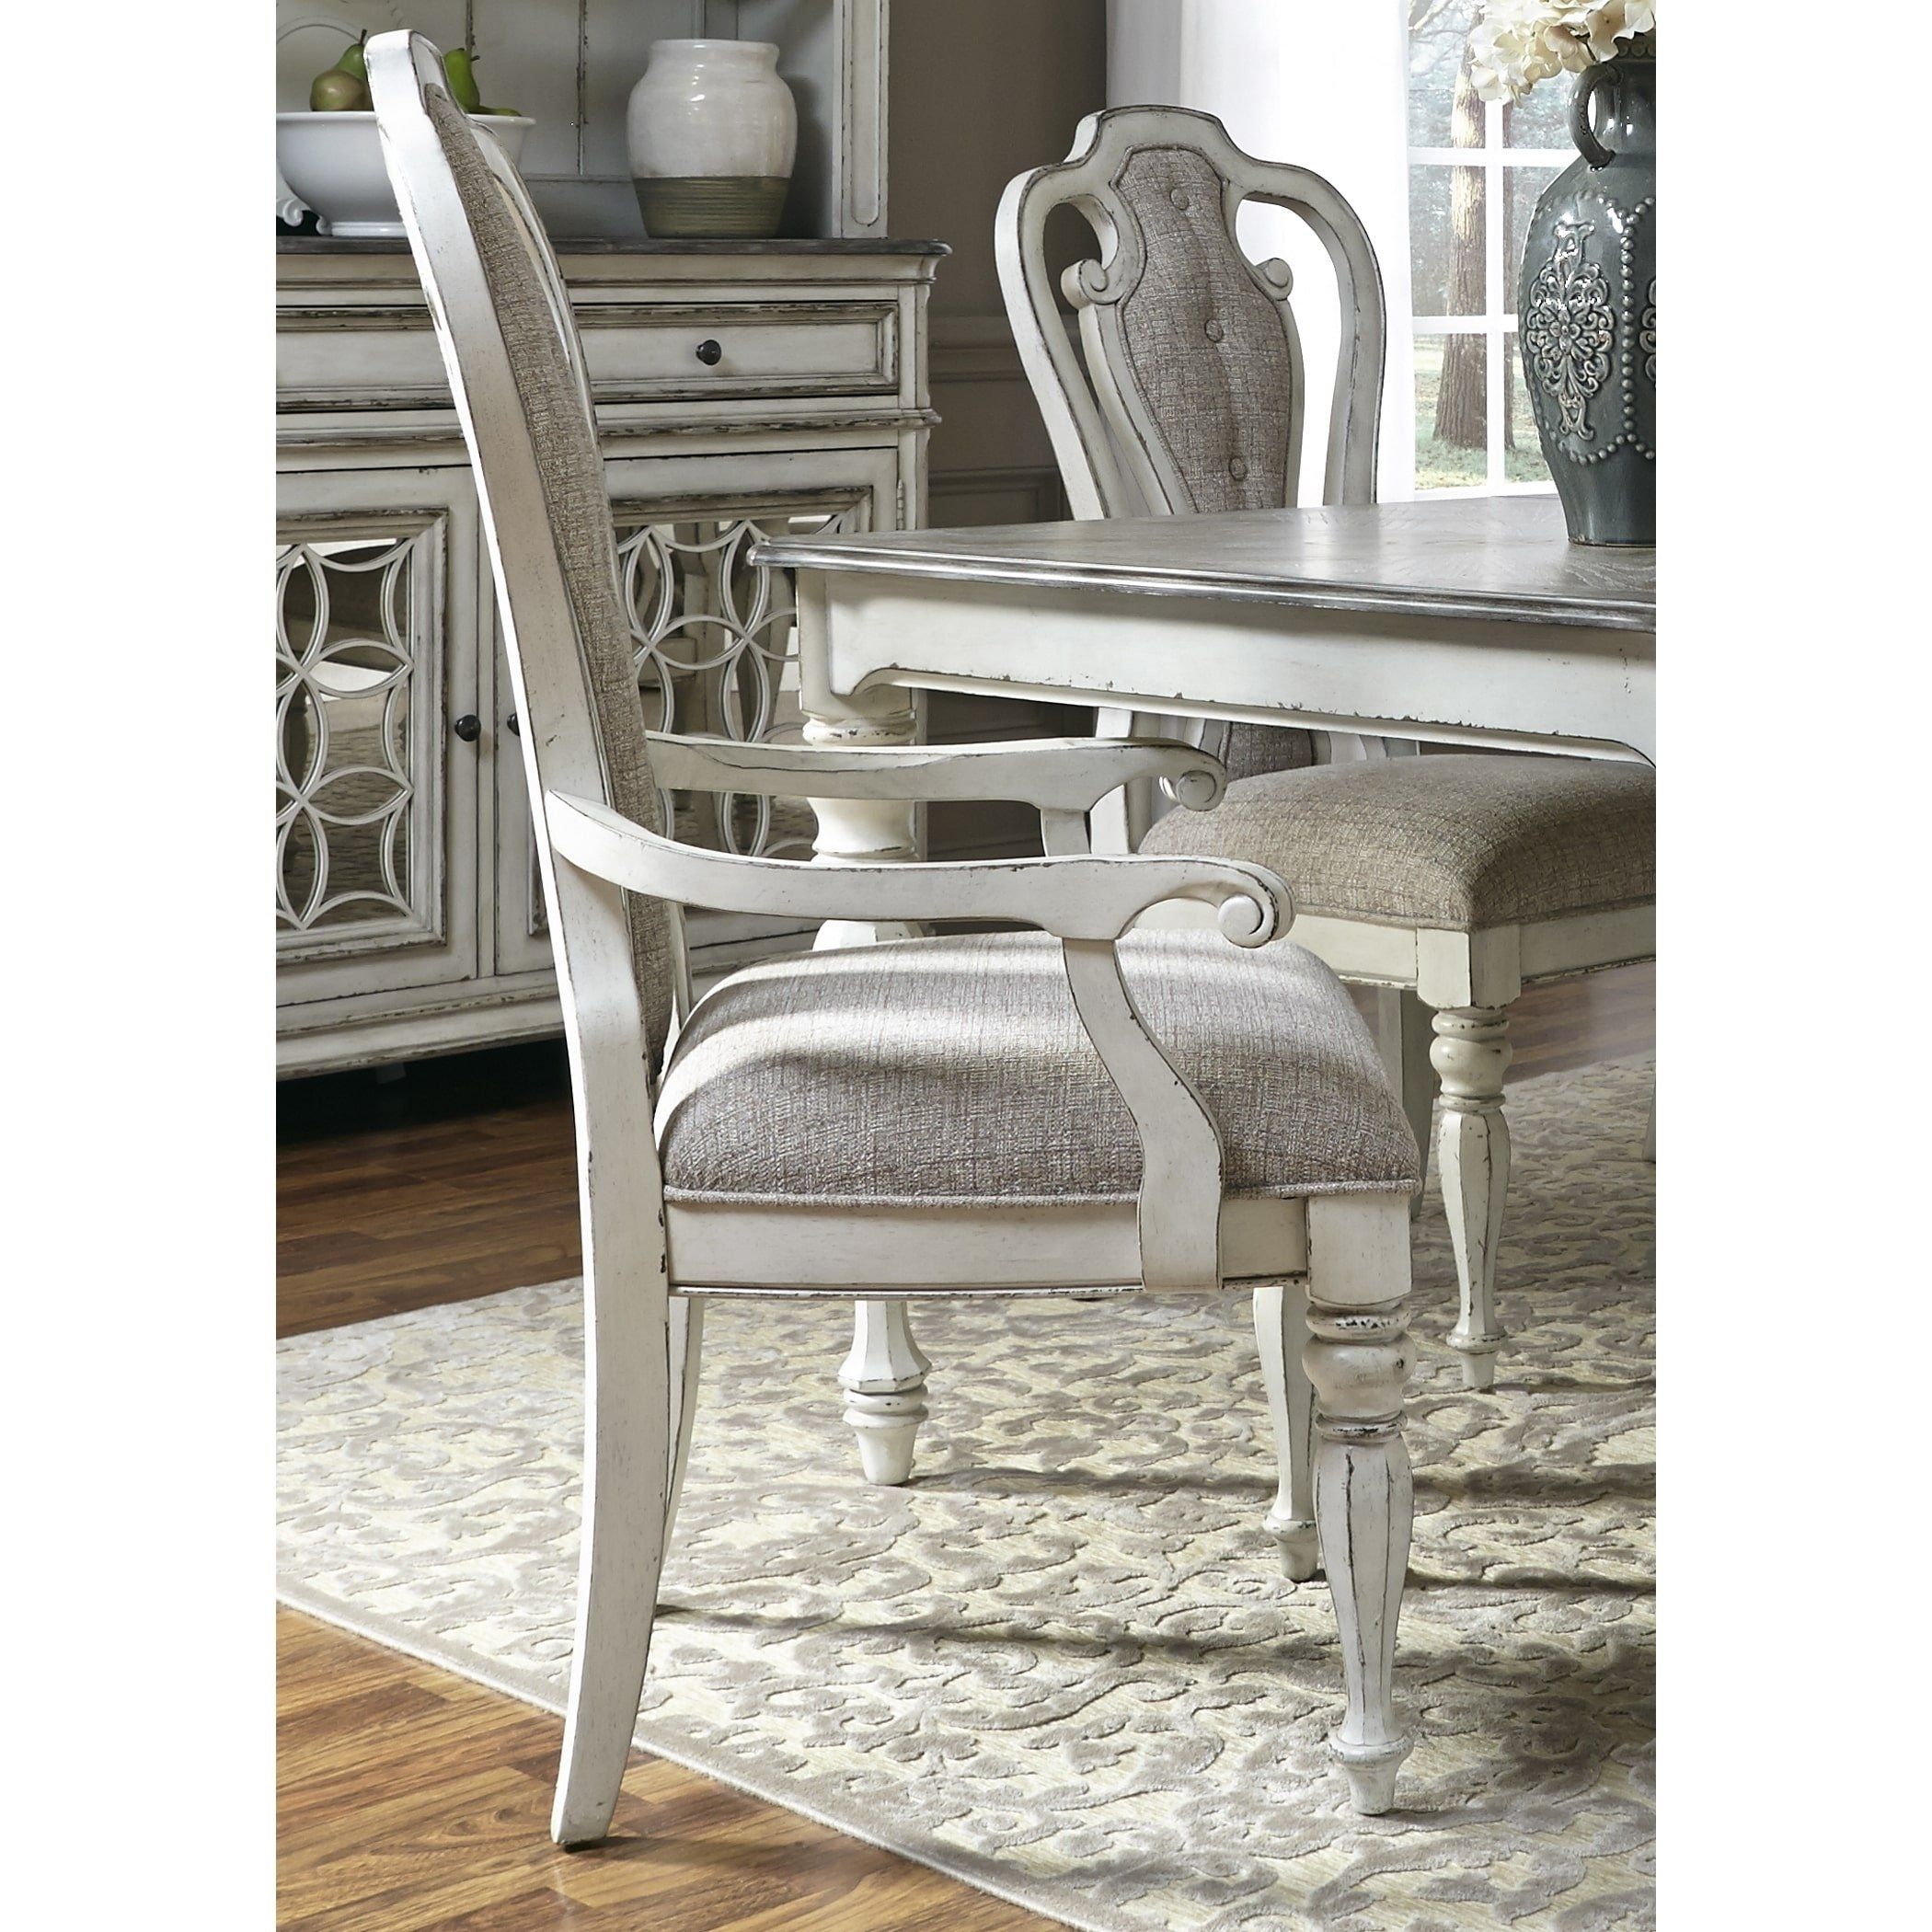 Magnolia Home Reed Arm Chairs With Regard To Most Current Shop Magnolia Manor Antique White Upholstered Arm Chair – Free (View 14 of 20)